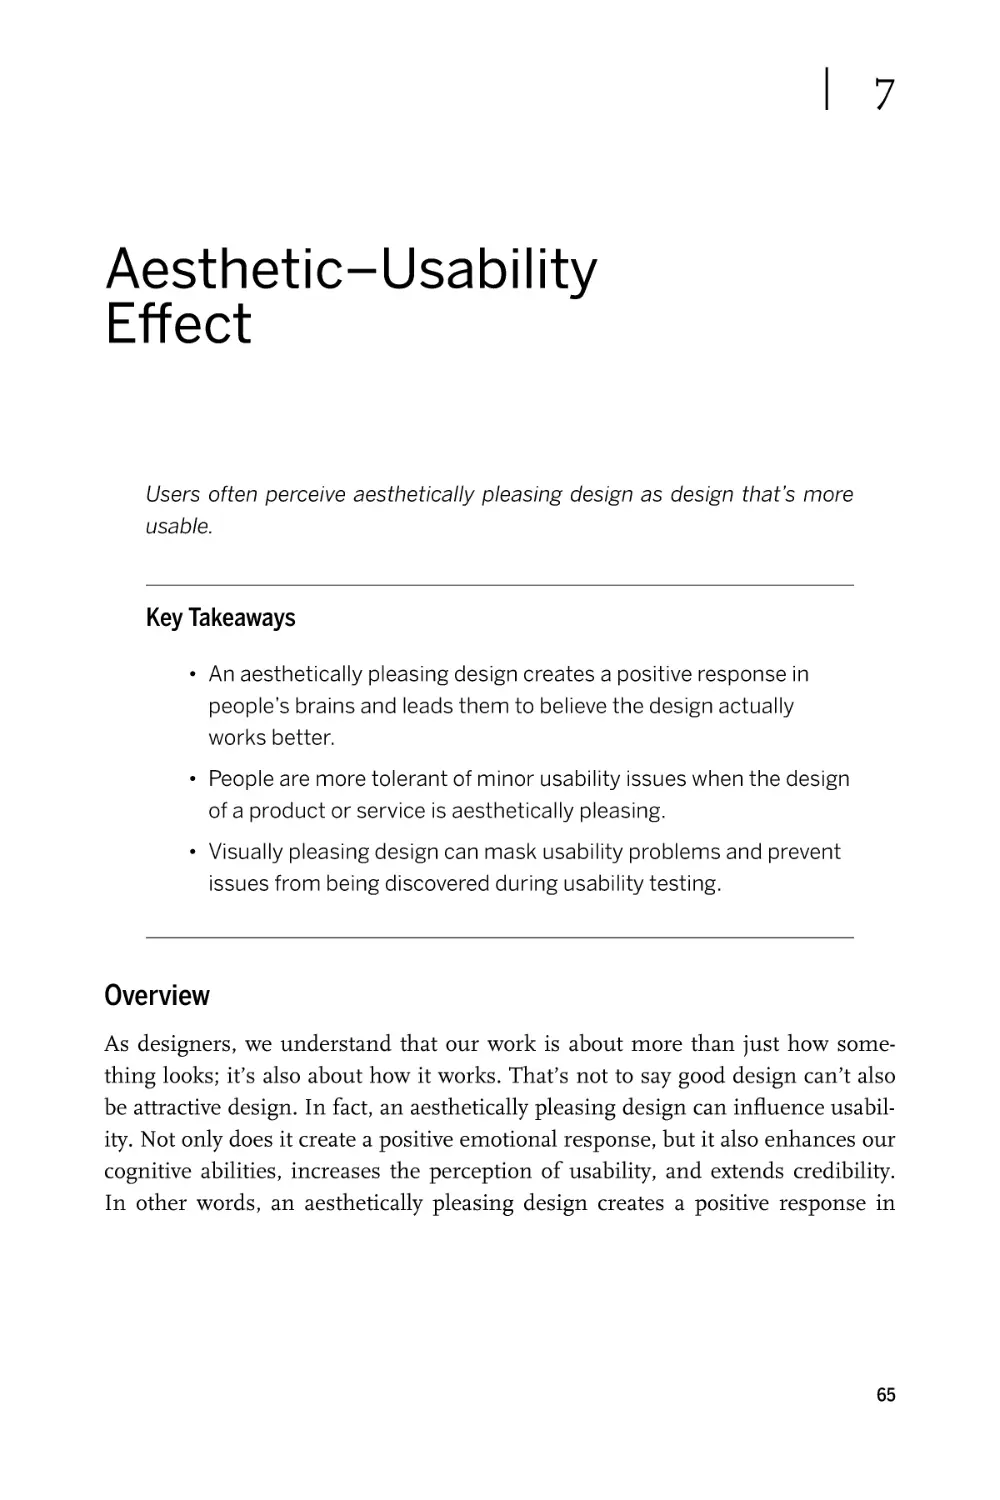 Chapter 7. Aesthetic–Usability Effect
Overview